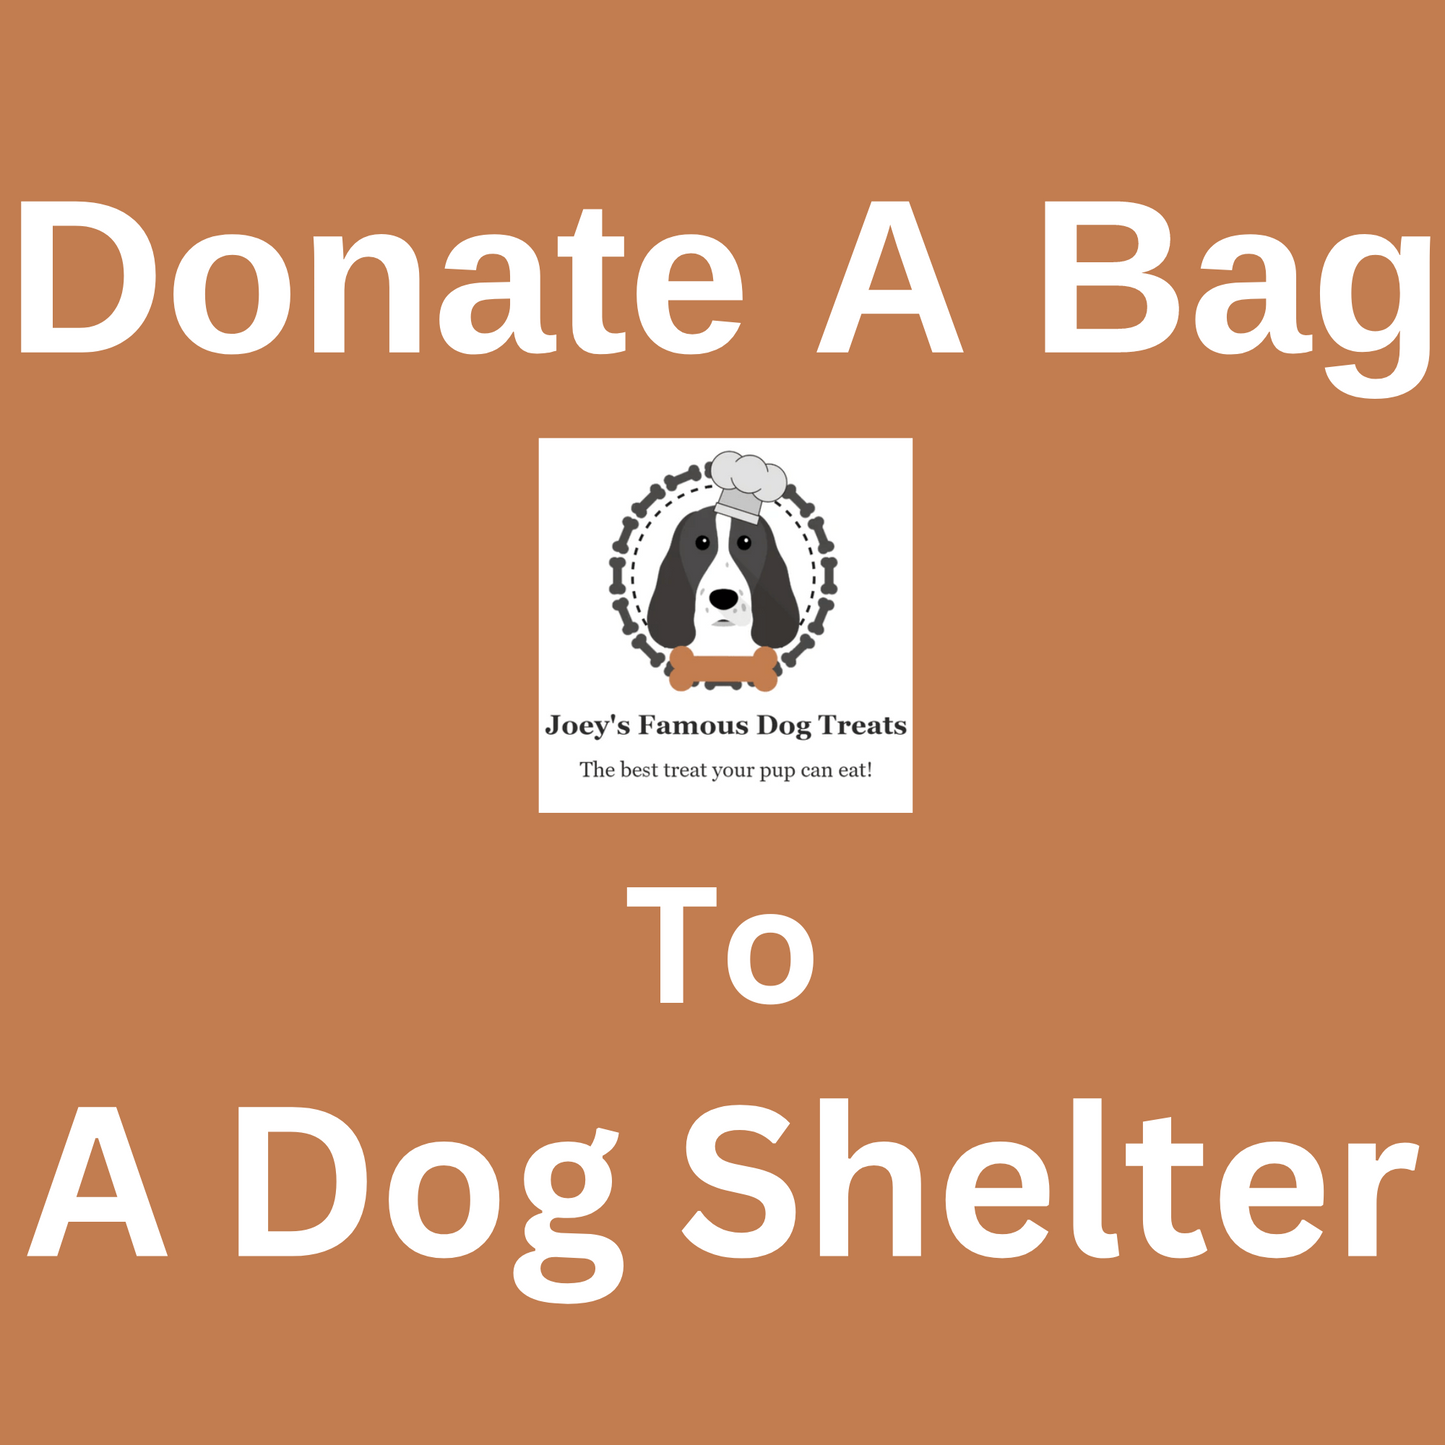 Donate A Bag To A Dog Shelter